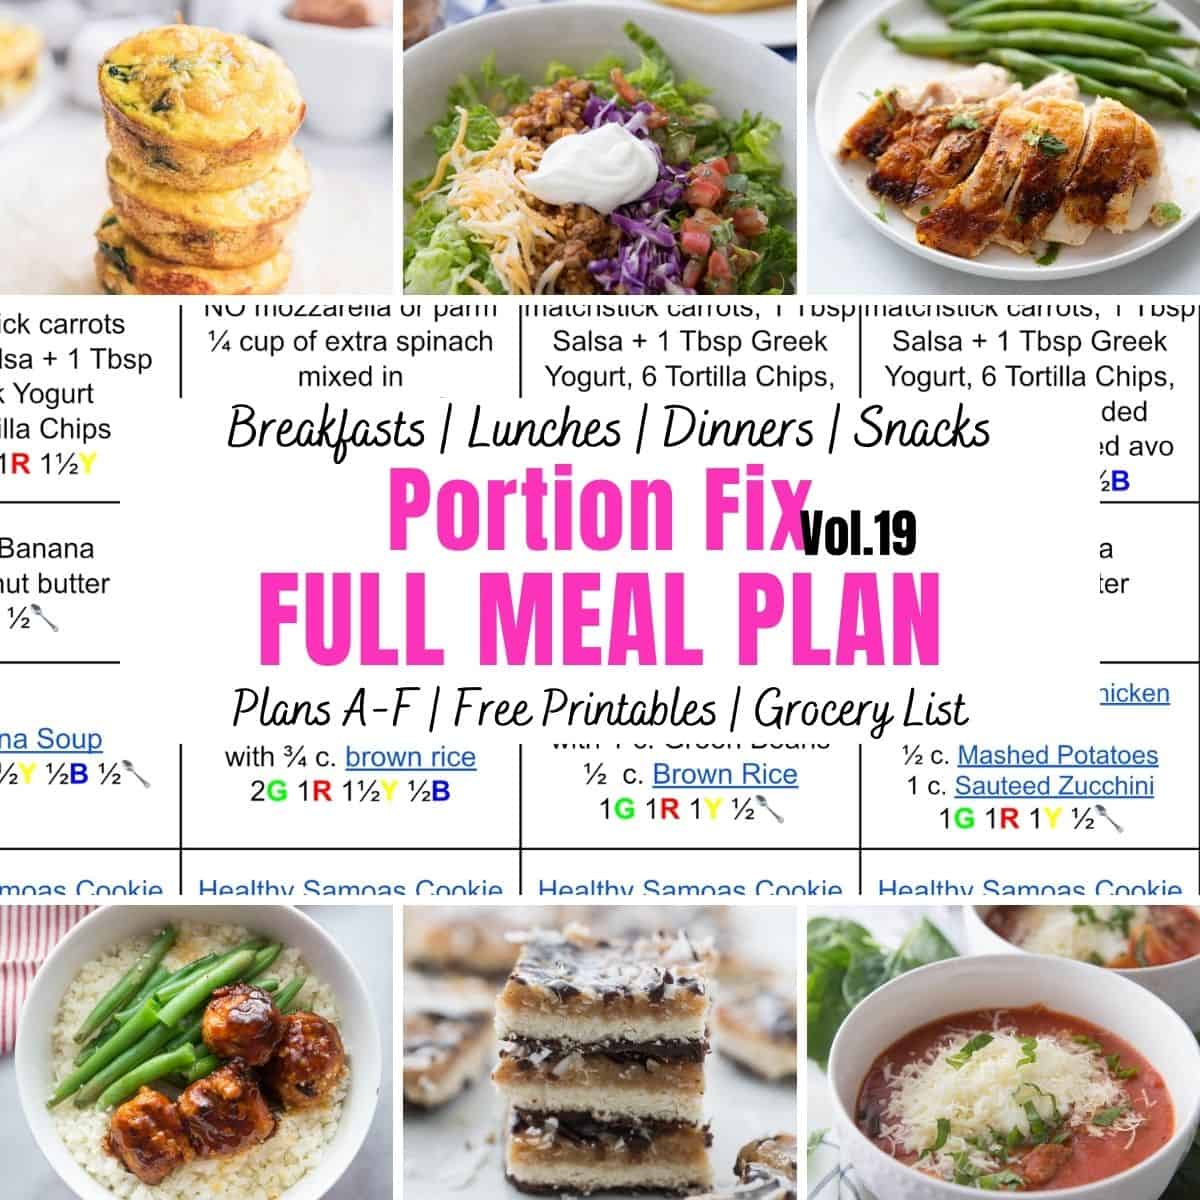 Food photo collage with pink and black text. Text says, "Portion Fix Full Meal Plan Vol. 19"